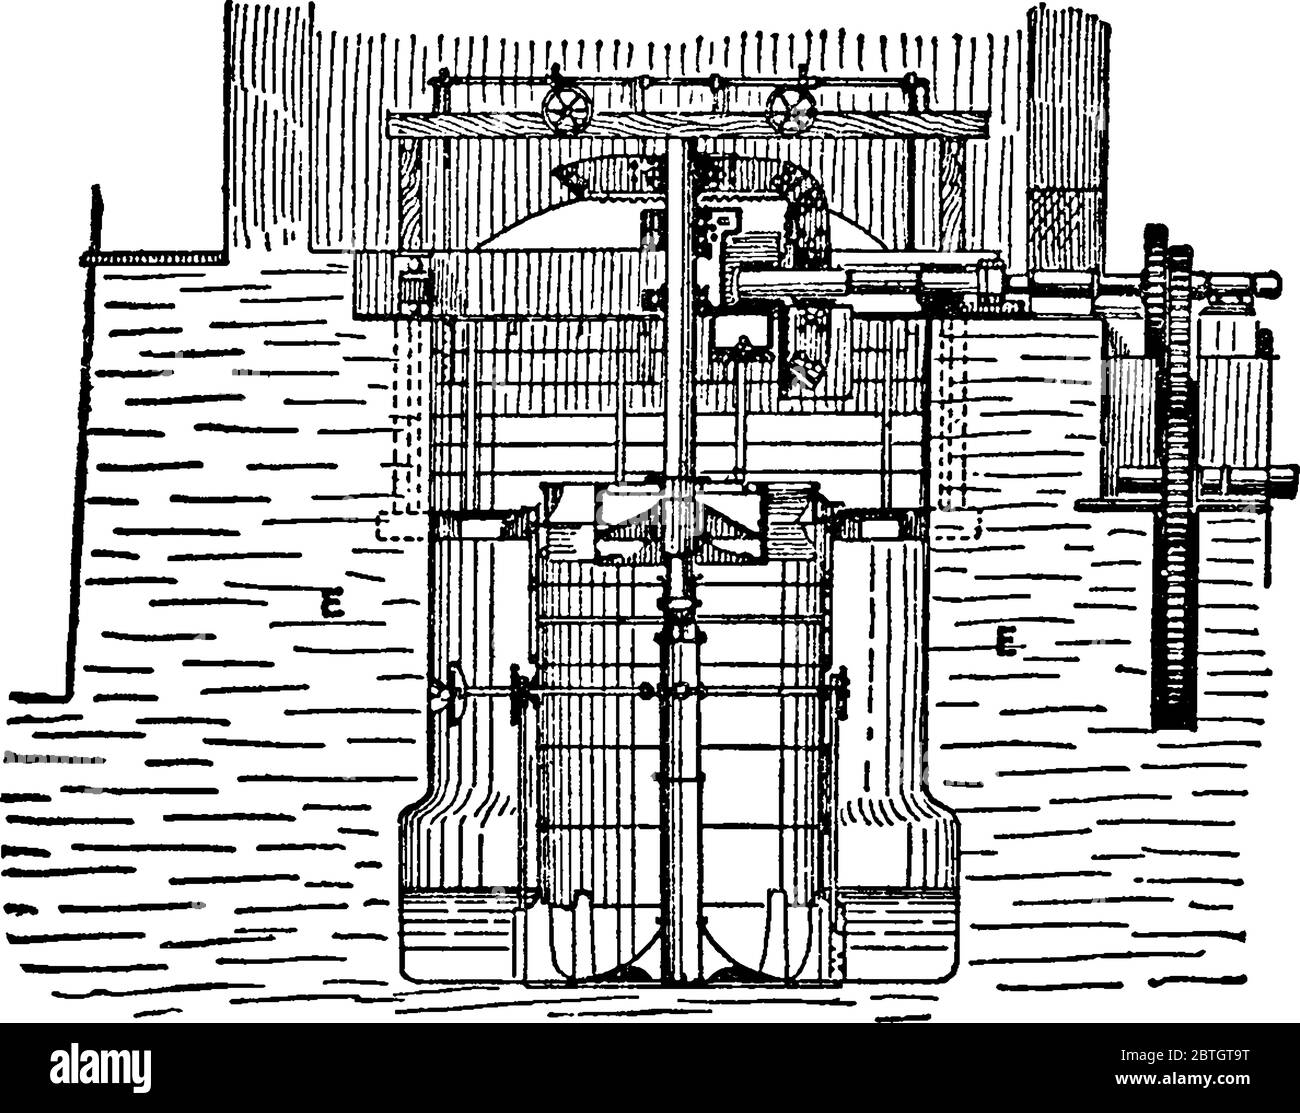 Jonval Turbine, fitted with a suction pipe and a circular balanced sluice for admitting and cutting off the water-supply, vintage line drawing or engr Stock Vector